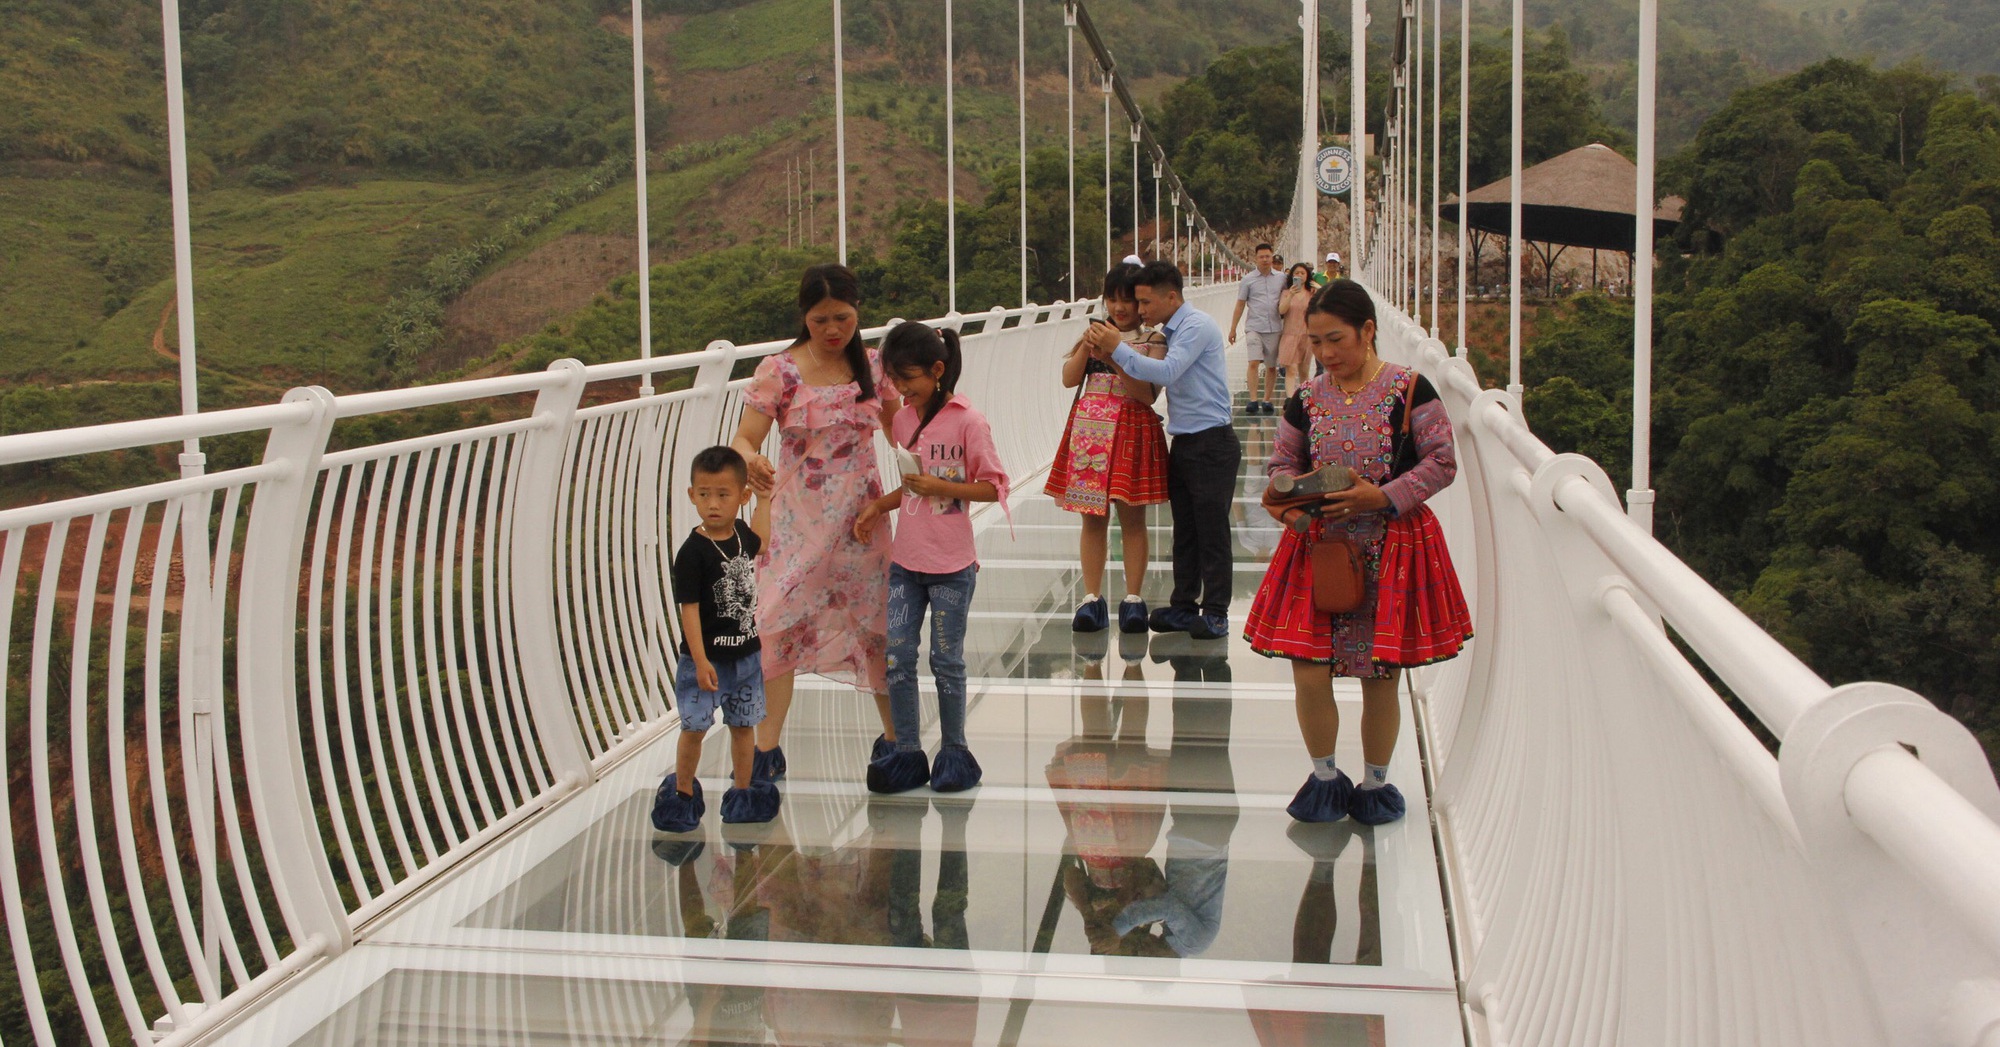 Tourists from all over the world flock to the world’s longest glass bridge in Son La during the holidays